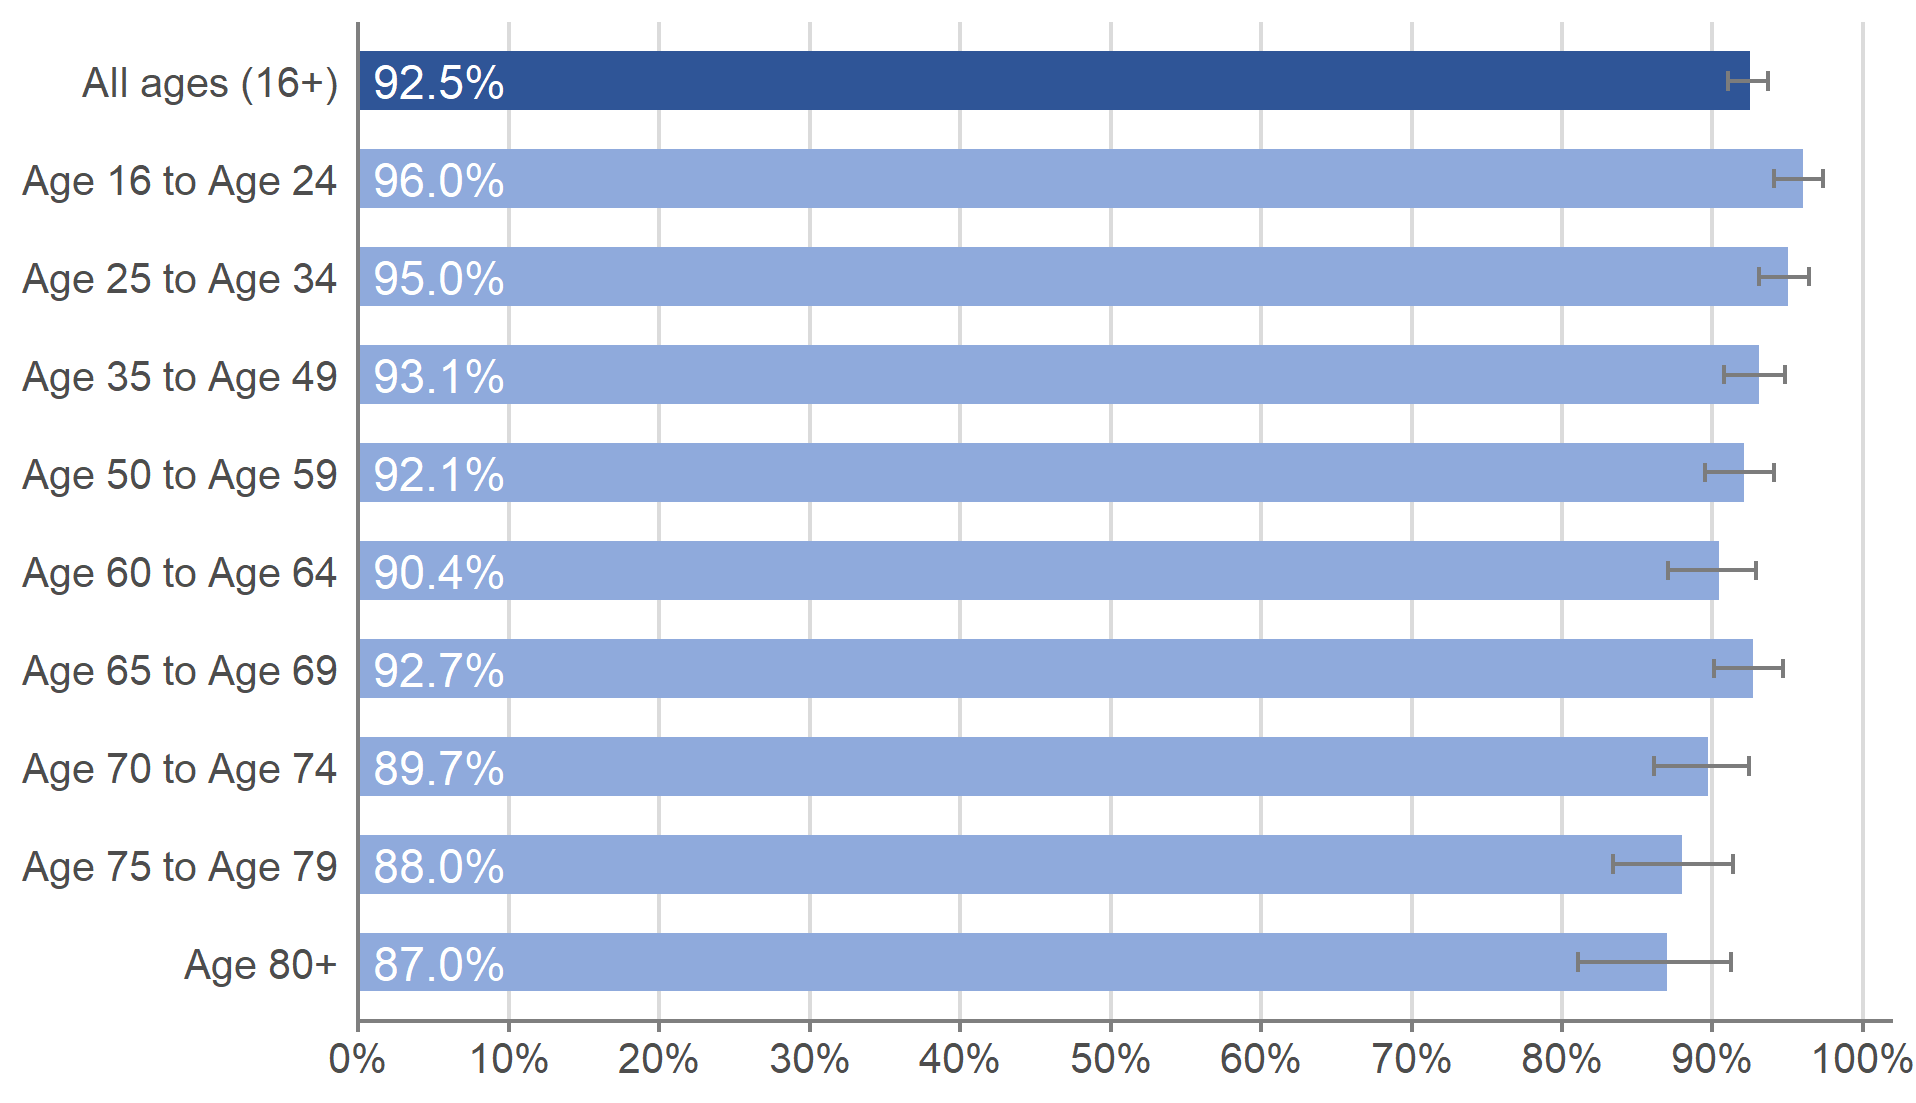 This chart shows the modelled weekly estimate of the percentage of people in the community population testing positive for antibodies to SARS-CoV-2 in the week beginning 18 October 2021 by age group including credible intervals.   The percentage of adults in the community population testing positive for antibodies aged 16 to 24 years was 96.0% (95% credible interval: 94.1% to 97.4%). The percentage testing positive for antibodies in those aged 25 and over ranged from 87.0% to 95.0%; the highest percentage of people testing positive for antibodies was in those aged 25 to 34 at 95.0% (95% credible interval: 93.1% to 96.4%).